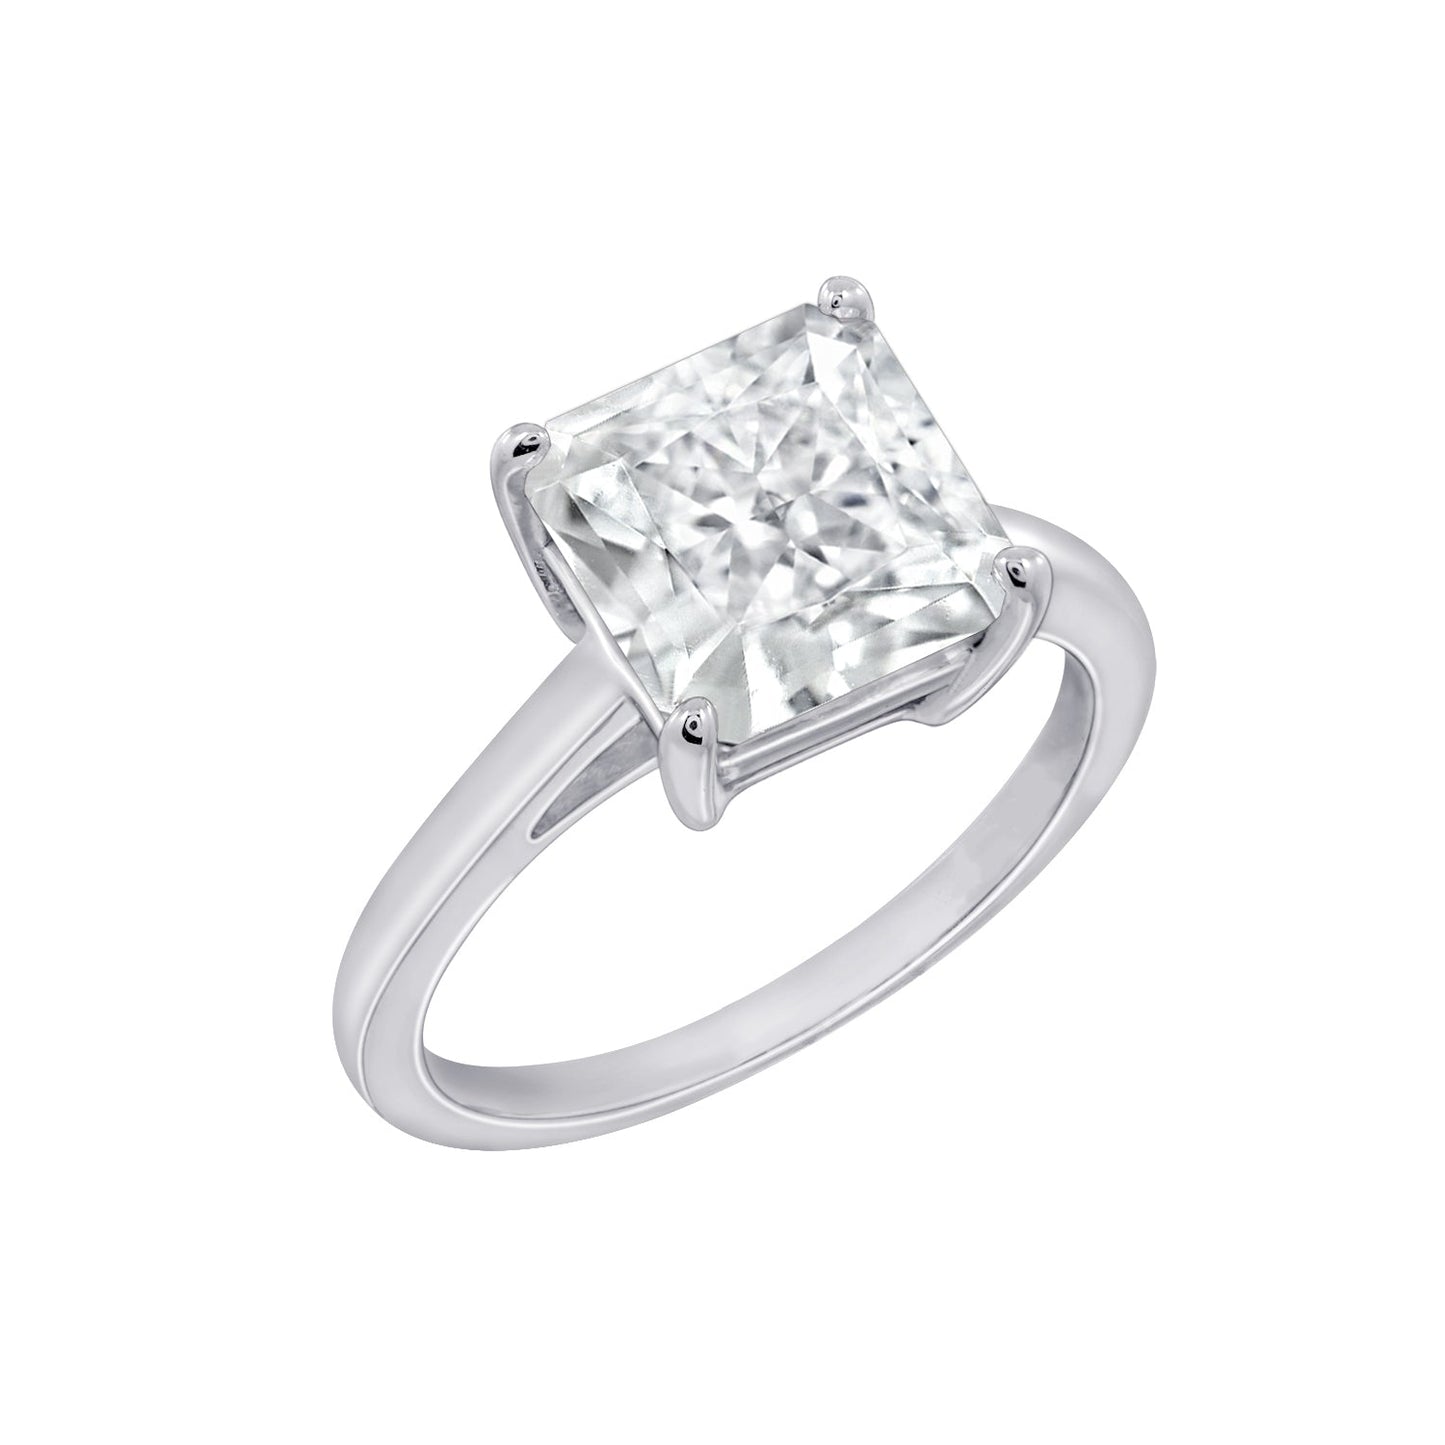 4ct Solitaire Princess Cut Cocktail Ring JER23738